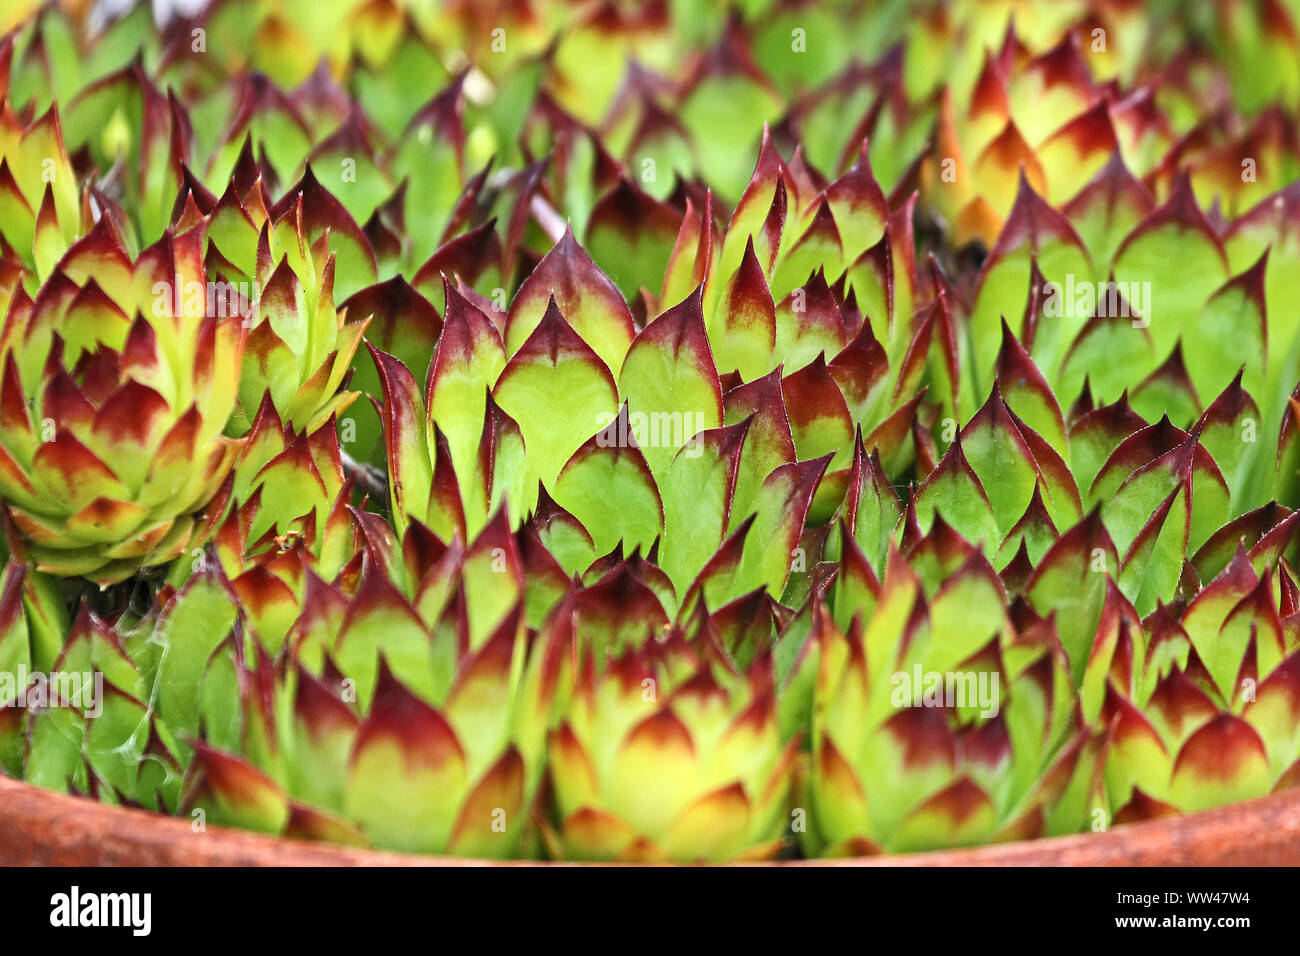 house leeks or houseleeks in a pot Latin sempervivum calcareum a variant of tectorum closeup in Italy also called live for ever or hen and chicks Stock Photo